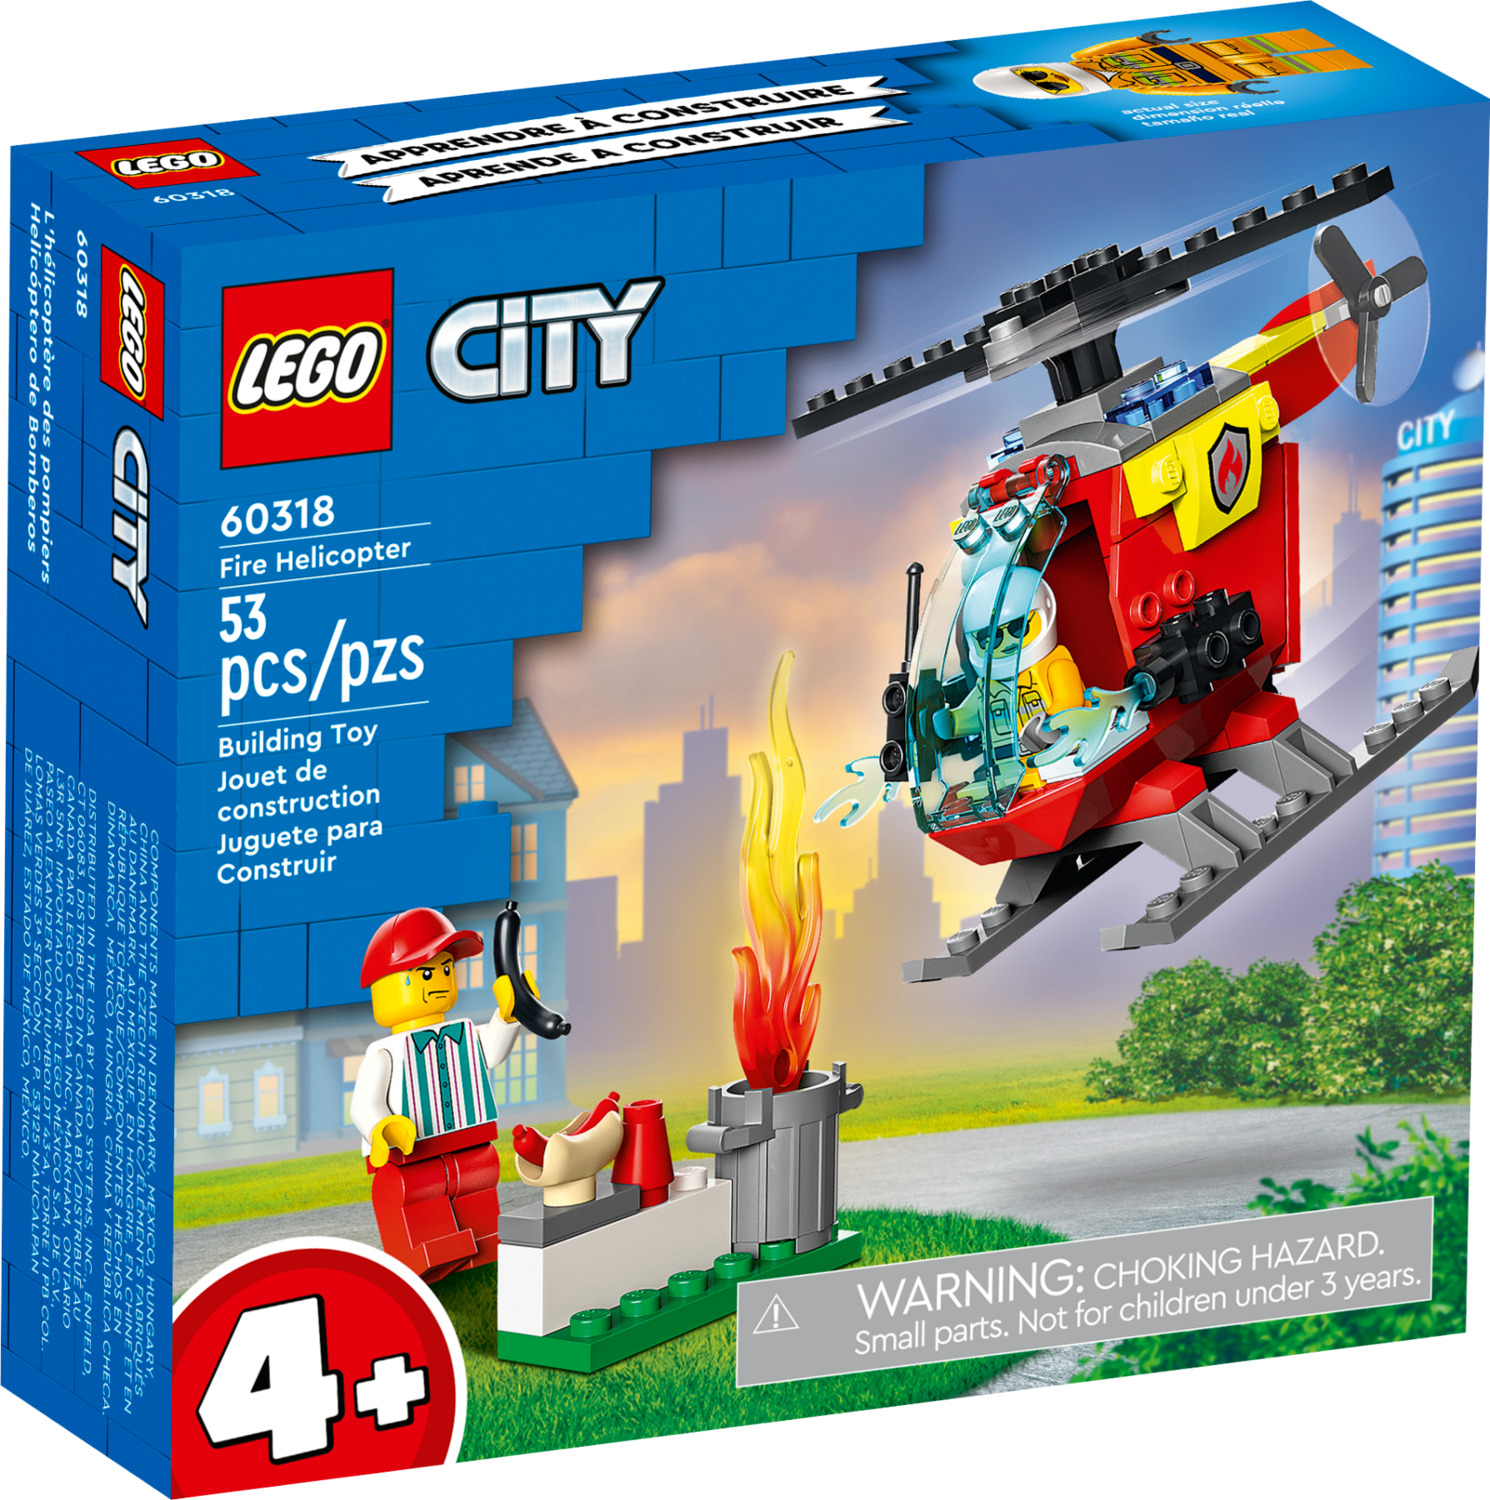 koppel Vergelding voordeel LEGO 60318 City: Fire Helicopter - Teaching Toys and Books